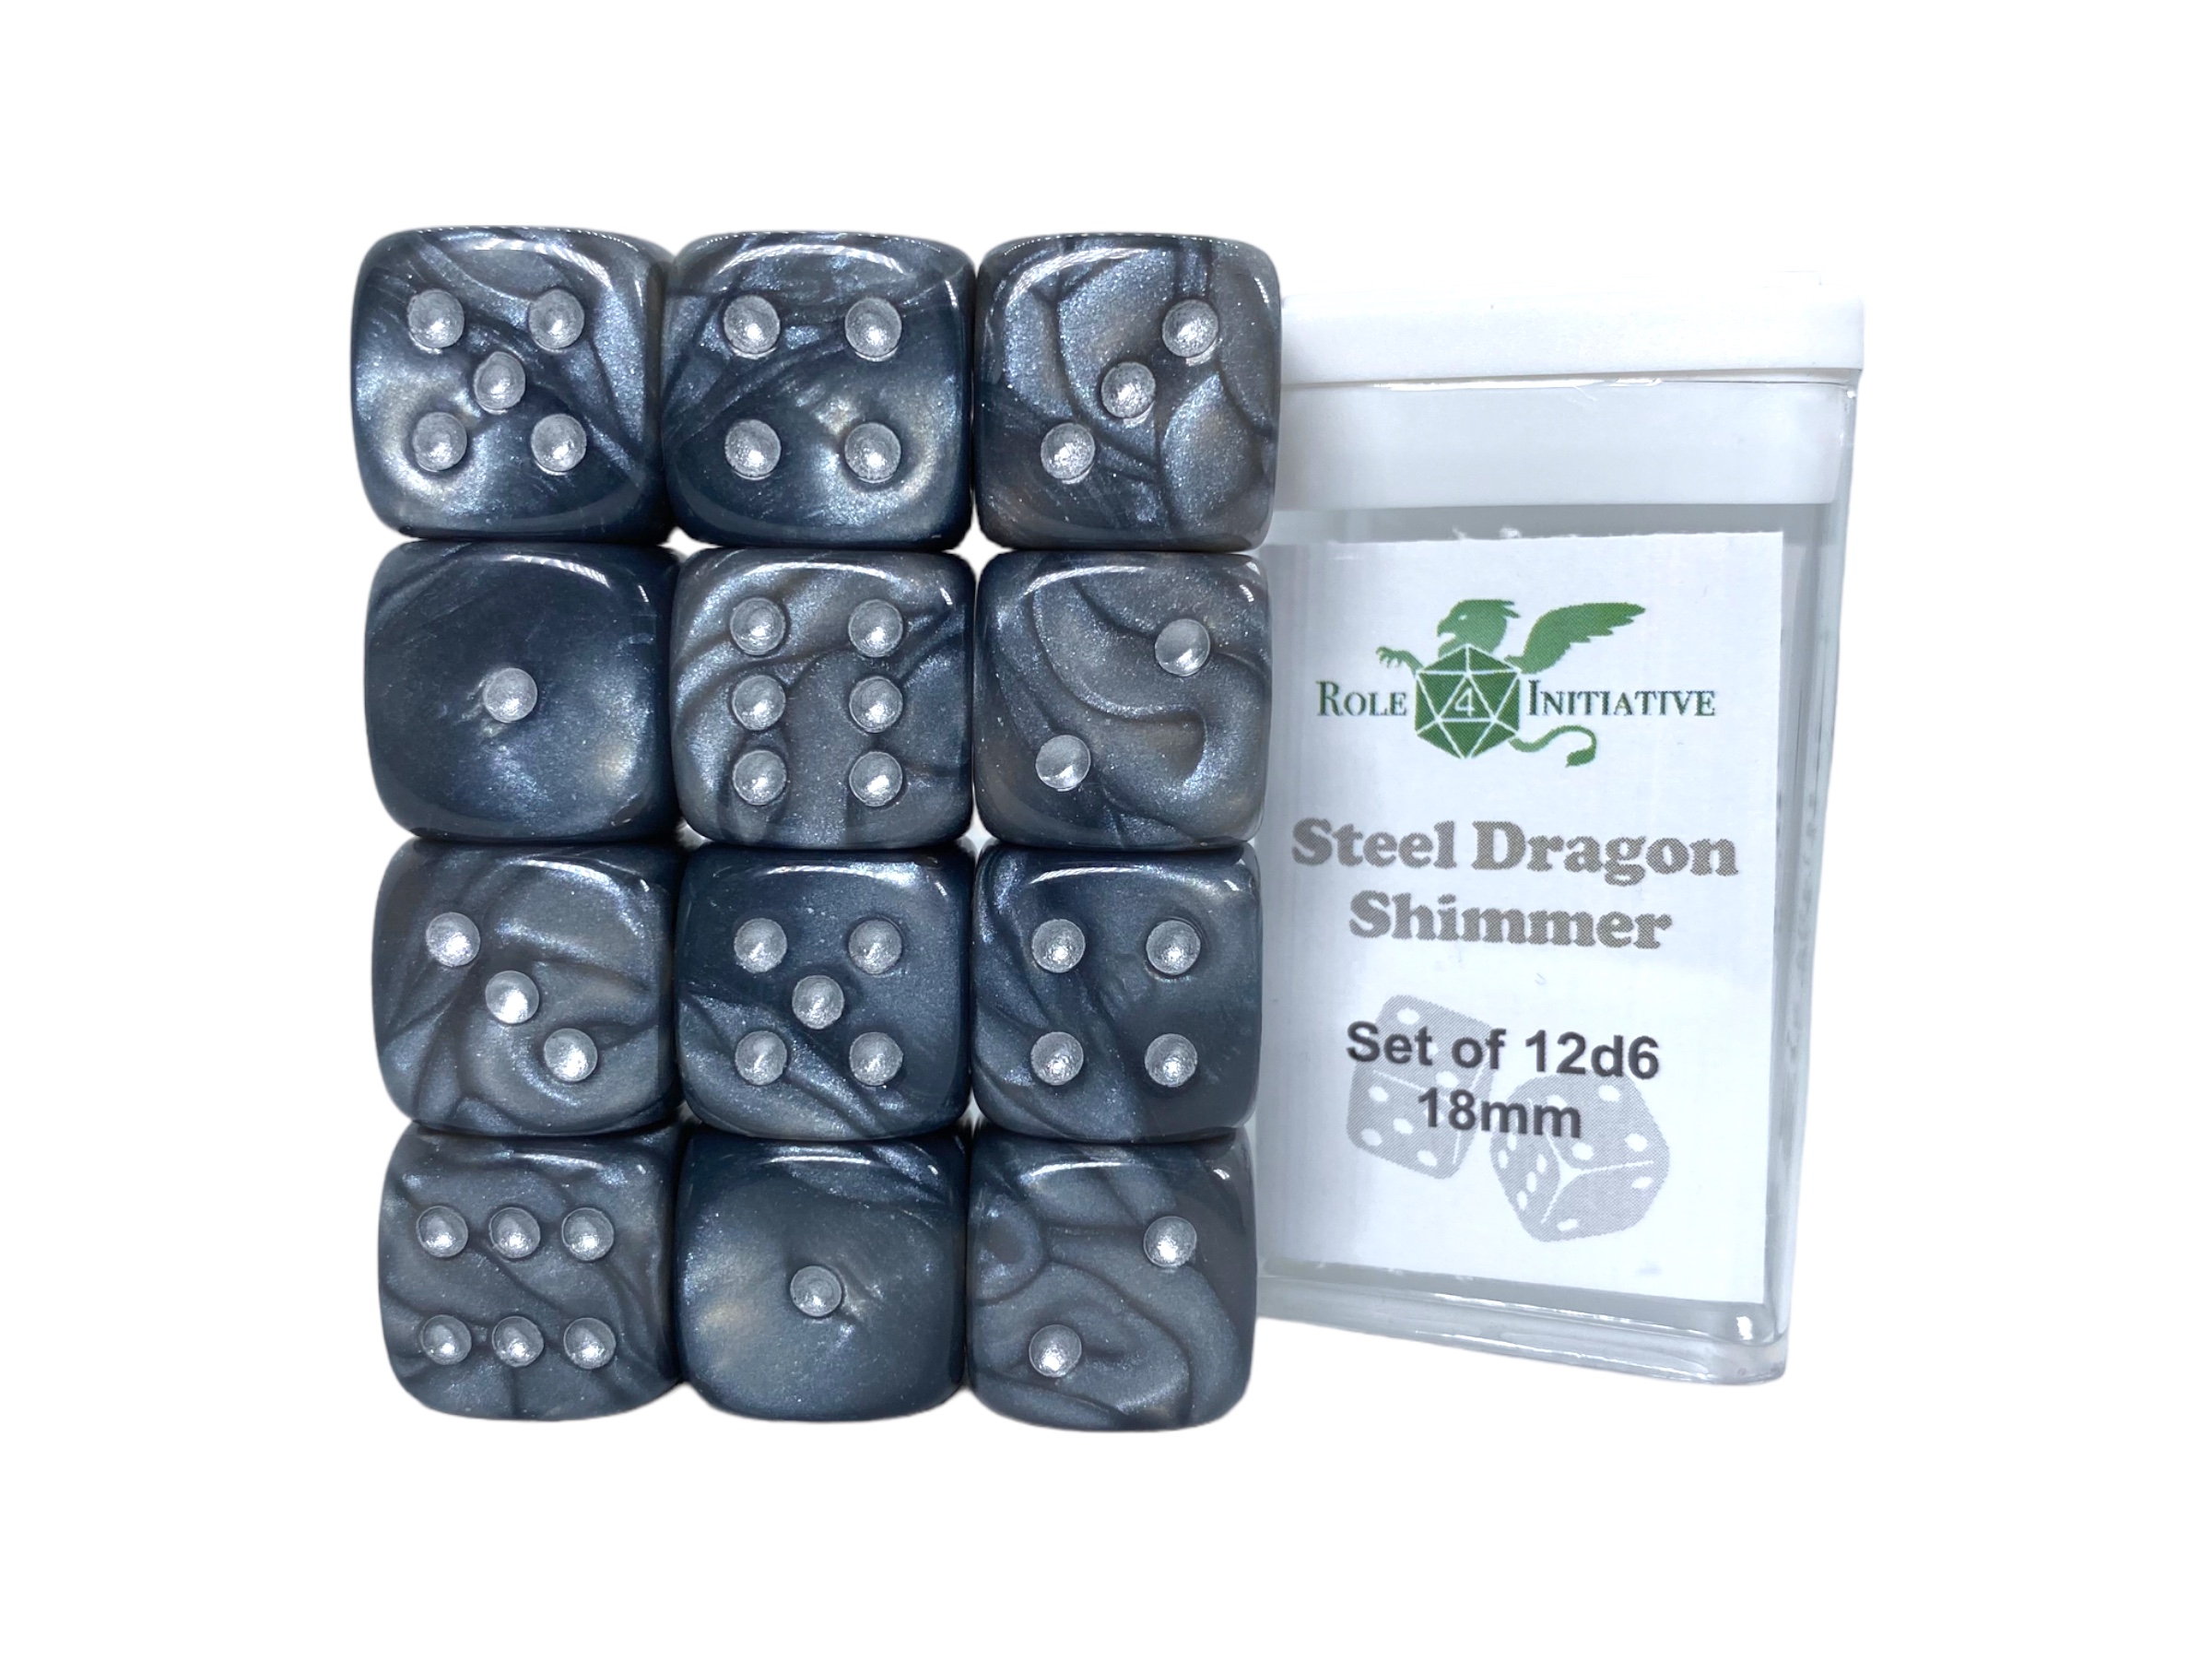 Role 4 Initiative: 12 D6 Pips Dice Set: Steel Dragon Shimmer 18MM 